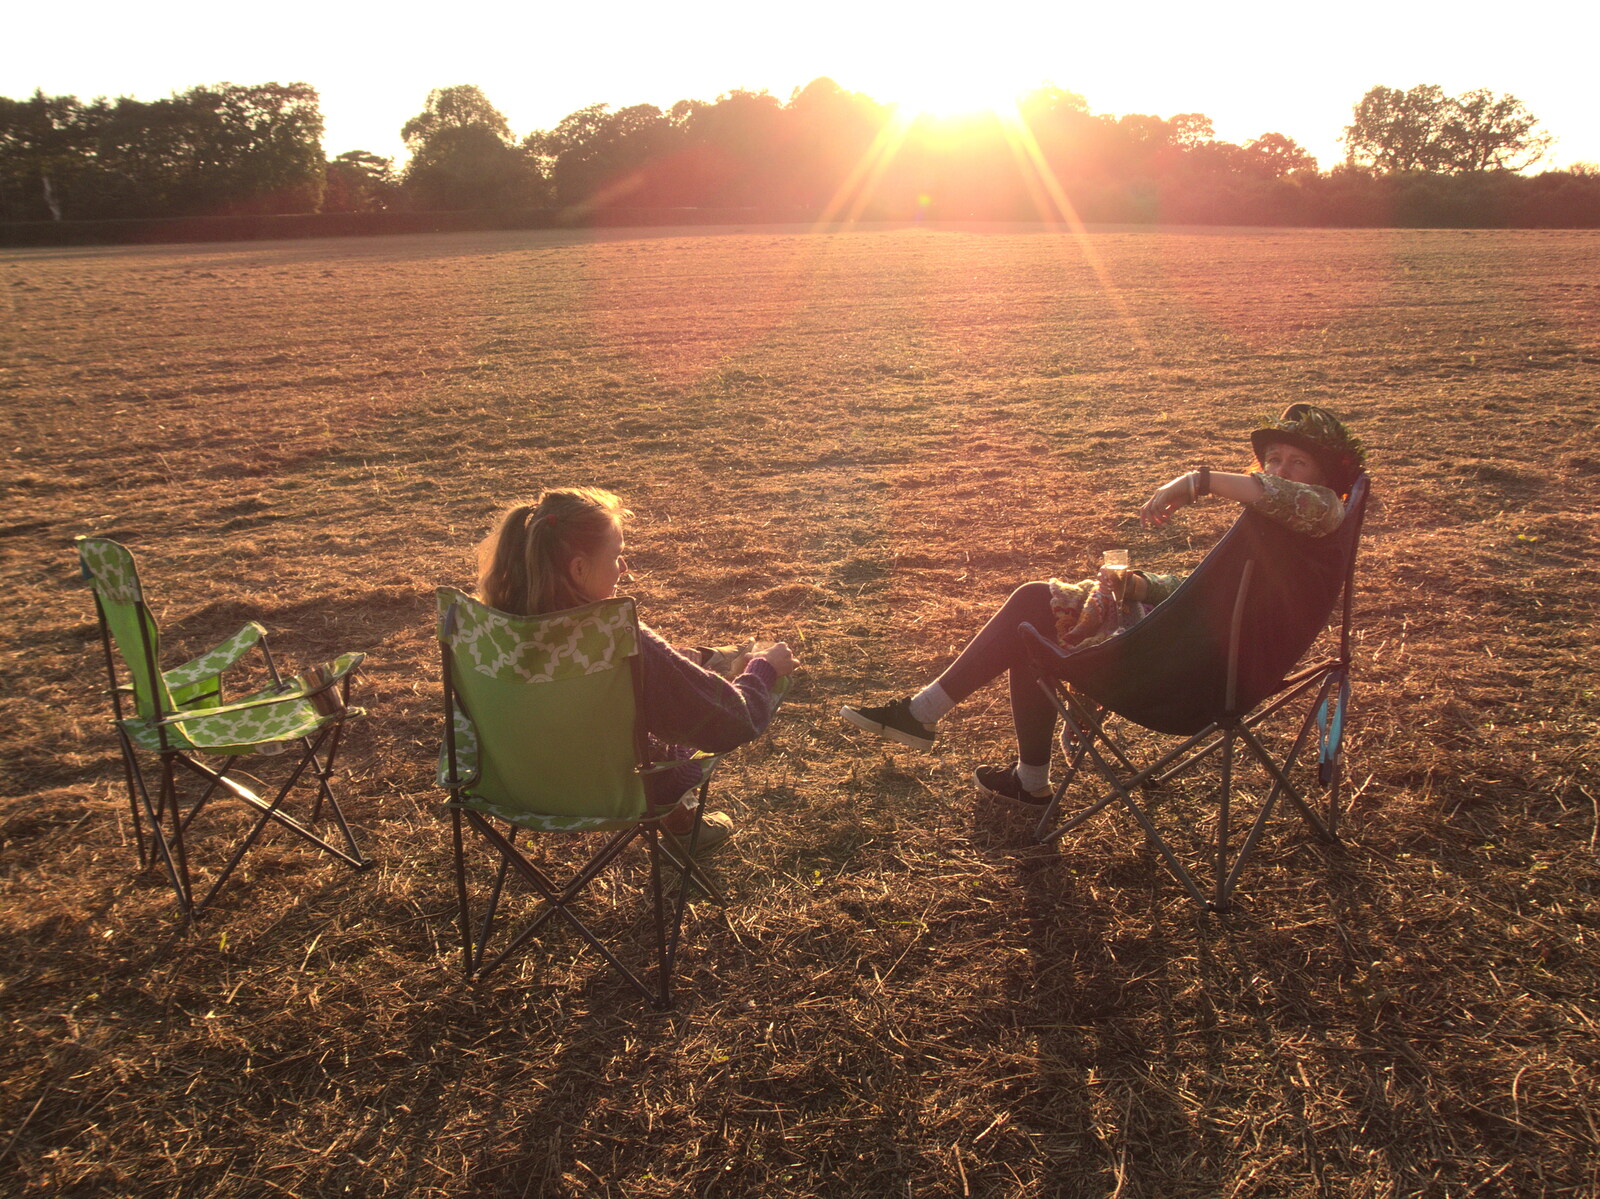 Allyson and Isobel have a late-evening drink from Maui Waui Festival, Hill Farm, Gressenhall, Norfolk - 28th August 2021